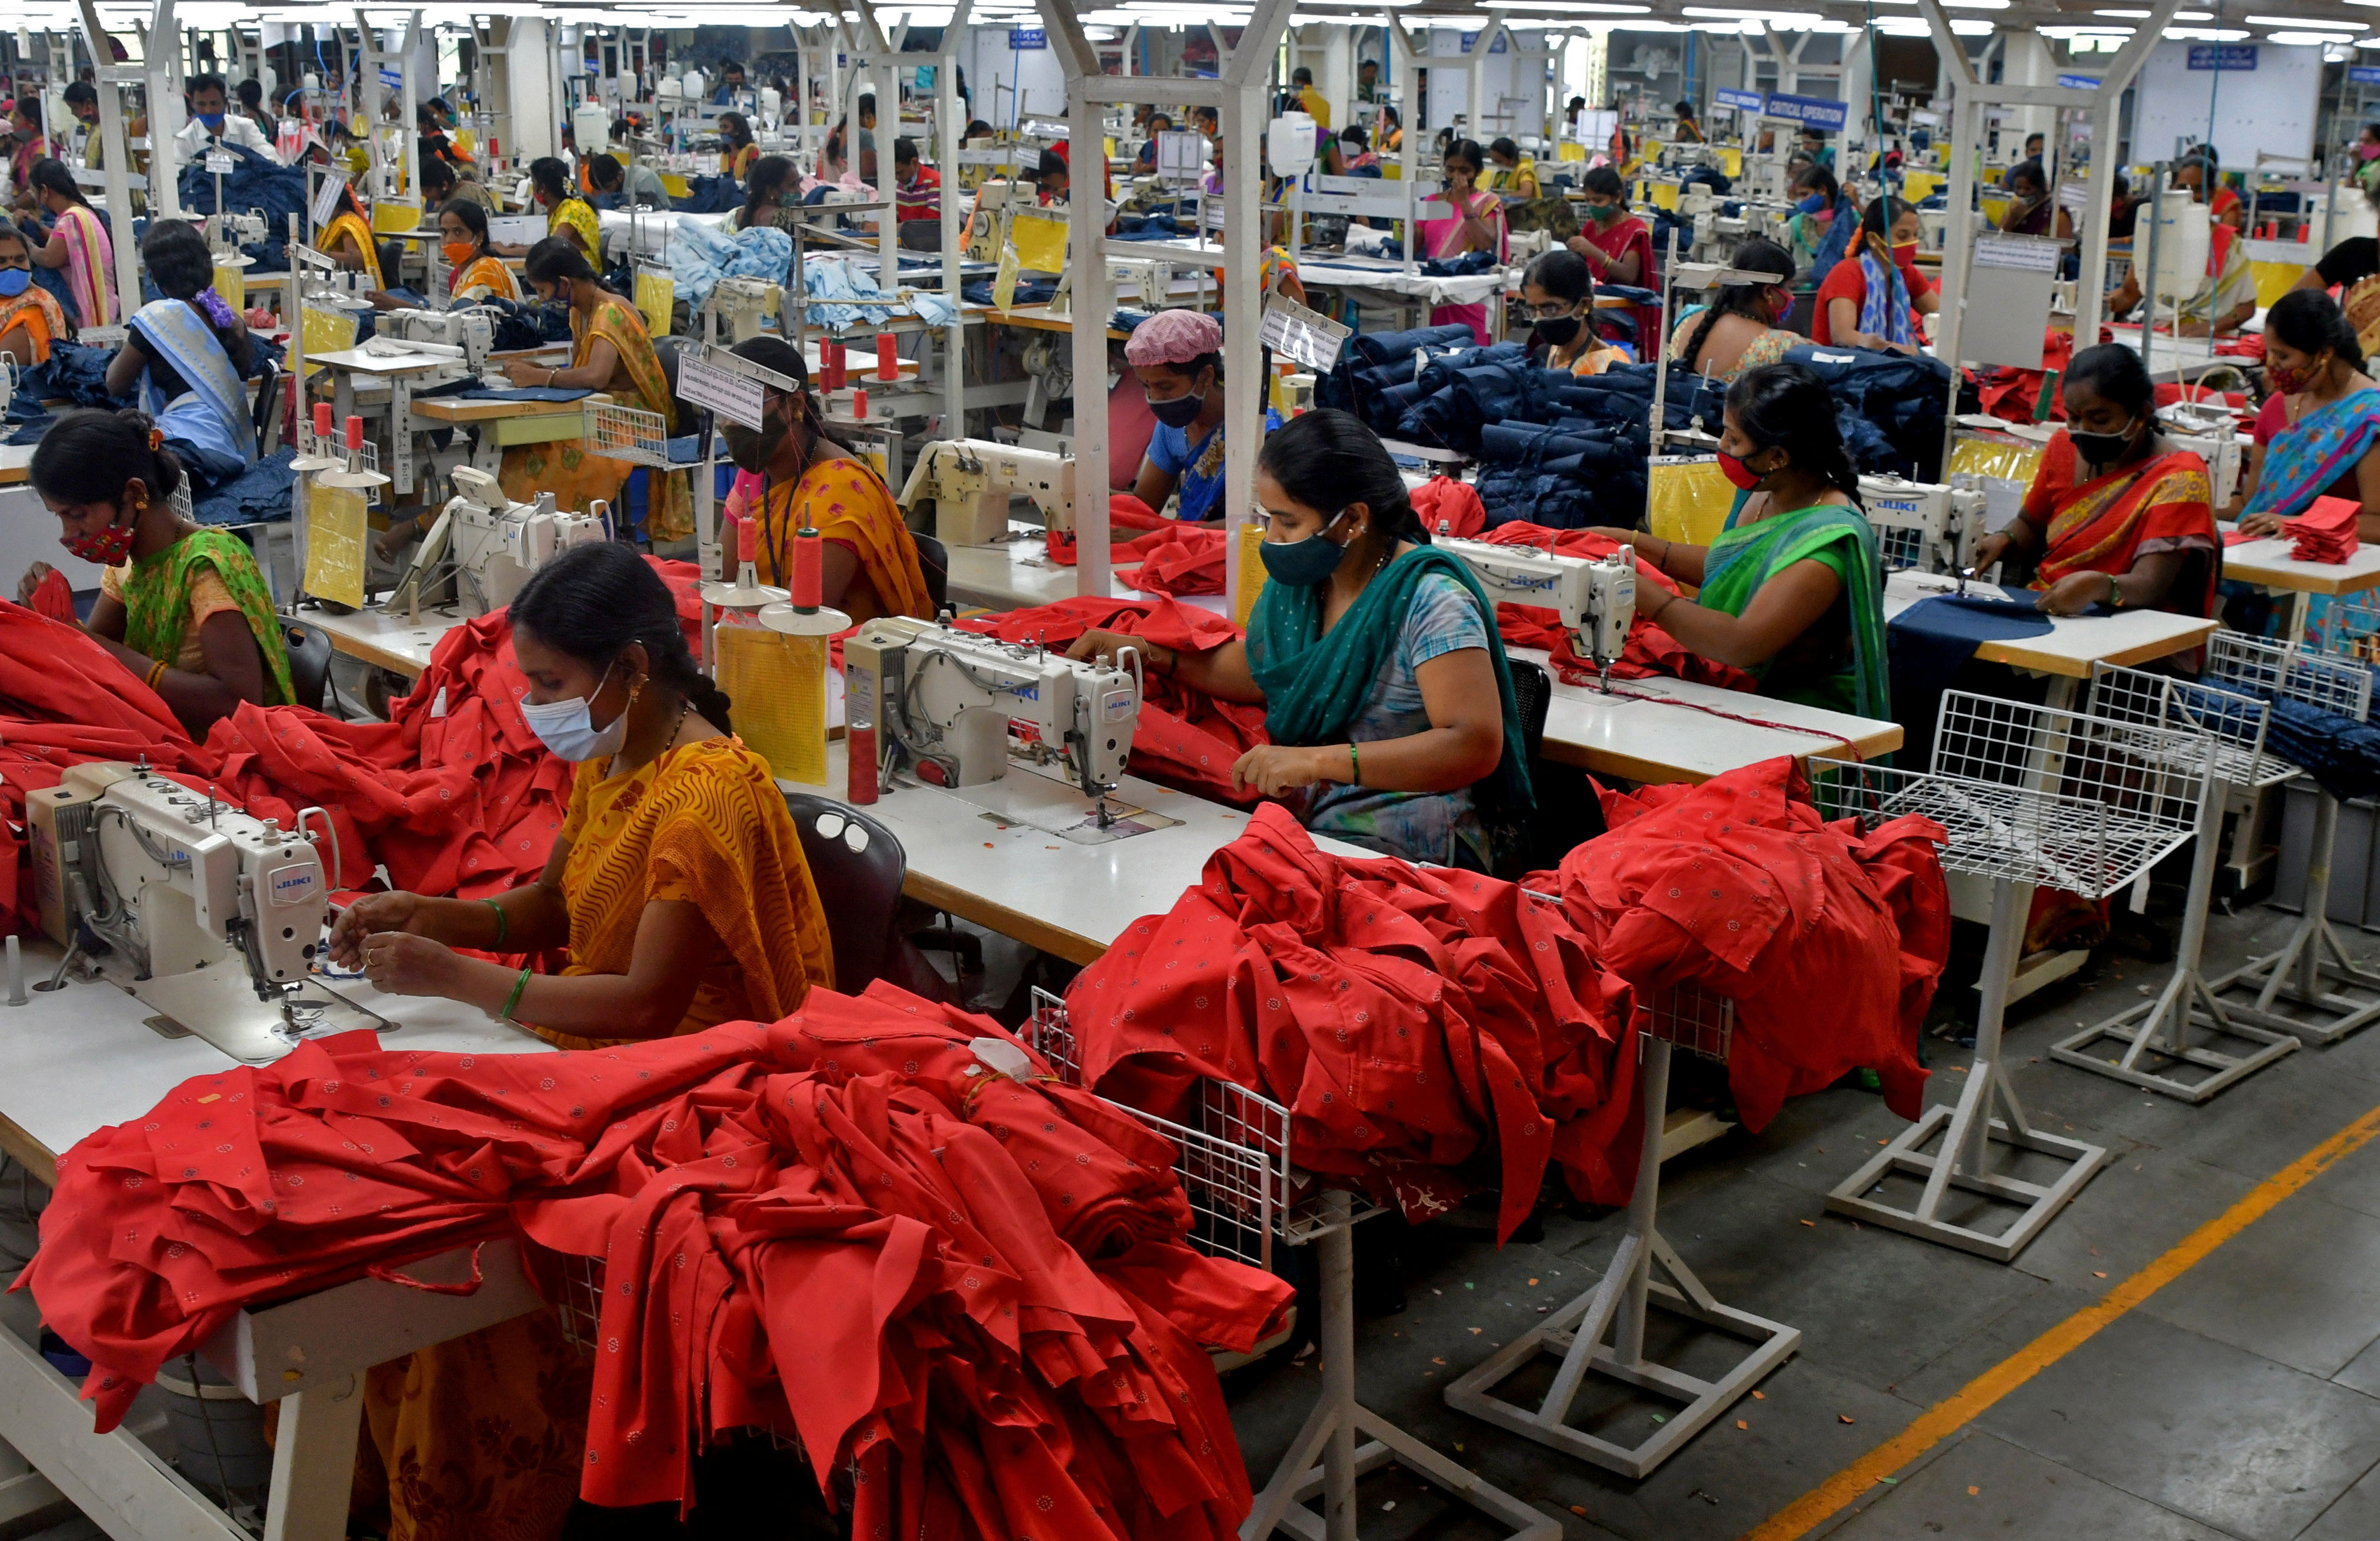 Focus: India's textile industry revs up, giving hope on jobs for PM Modi